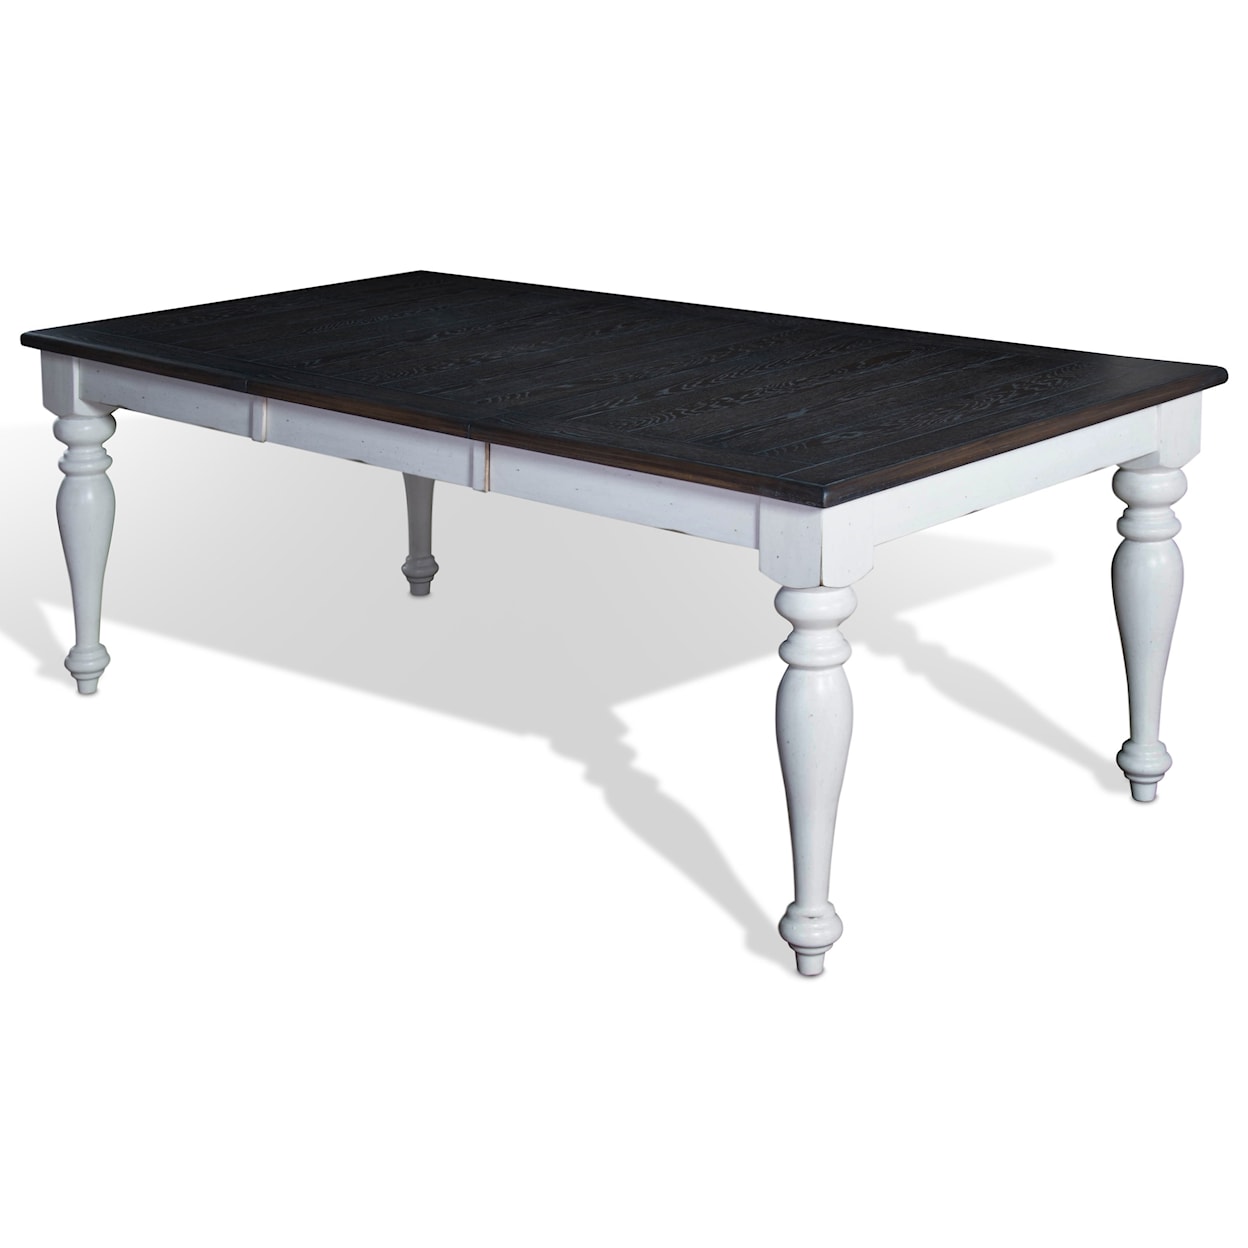 Sunny Designs Bourbon Trail Extension Dining Table